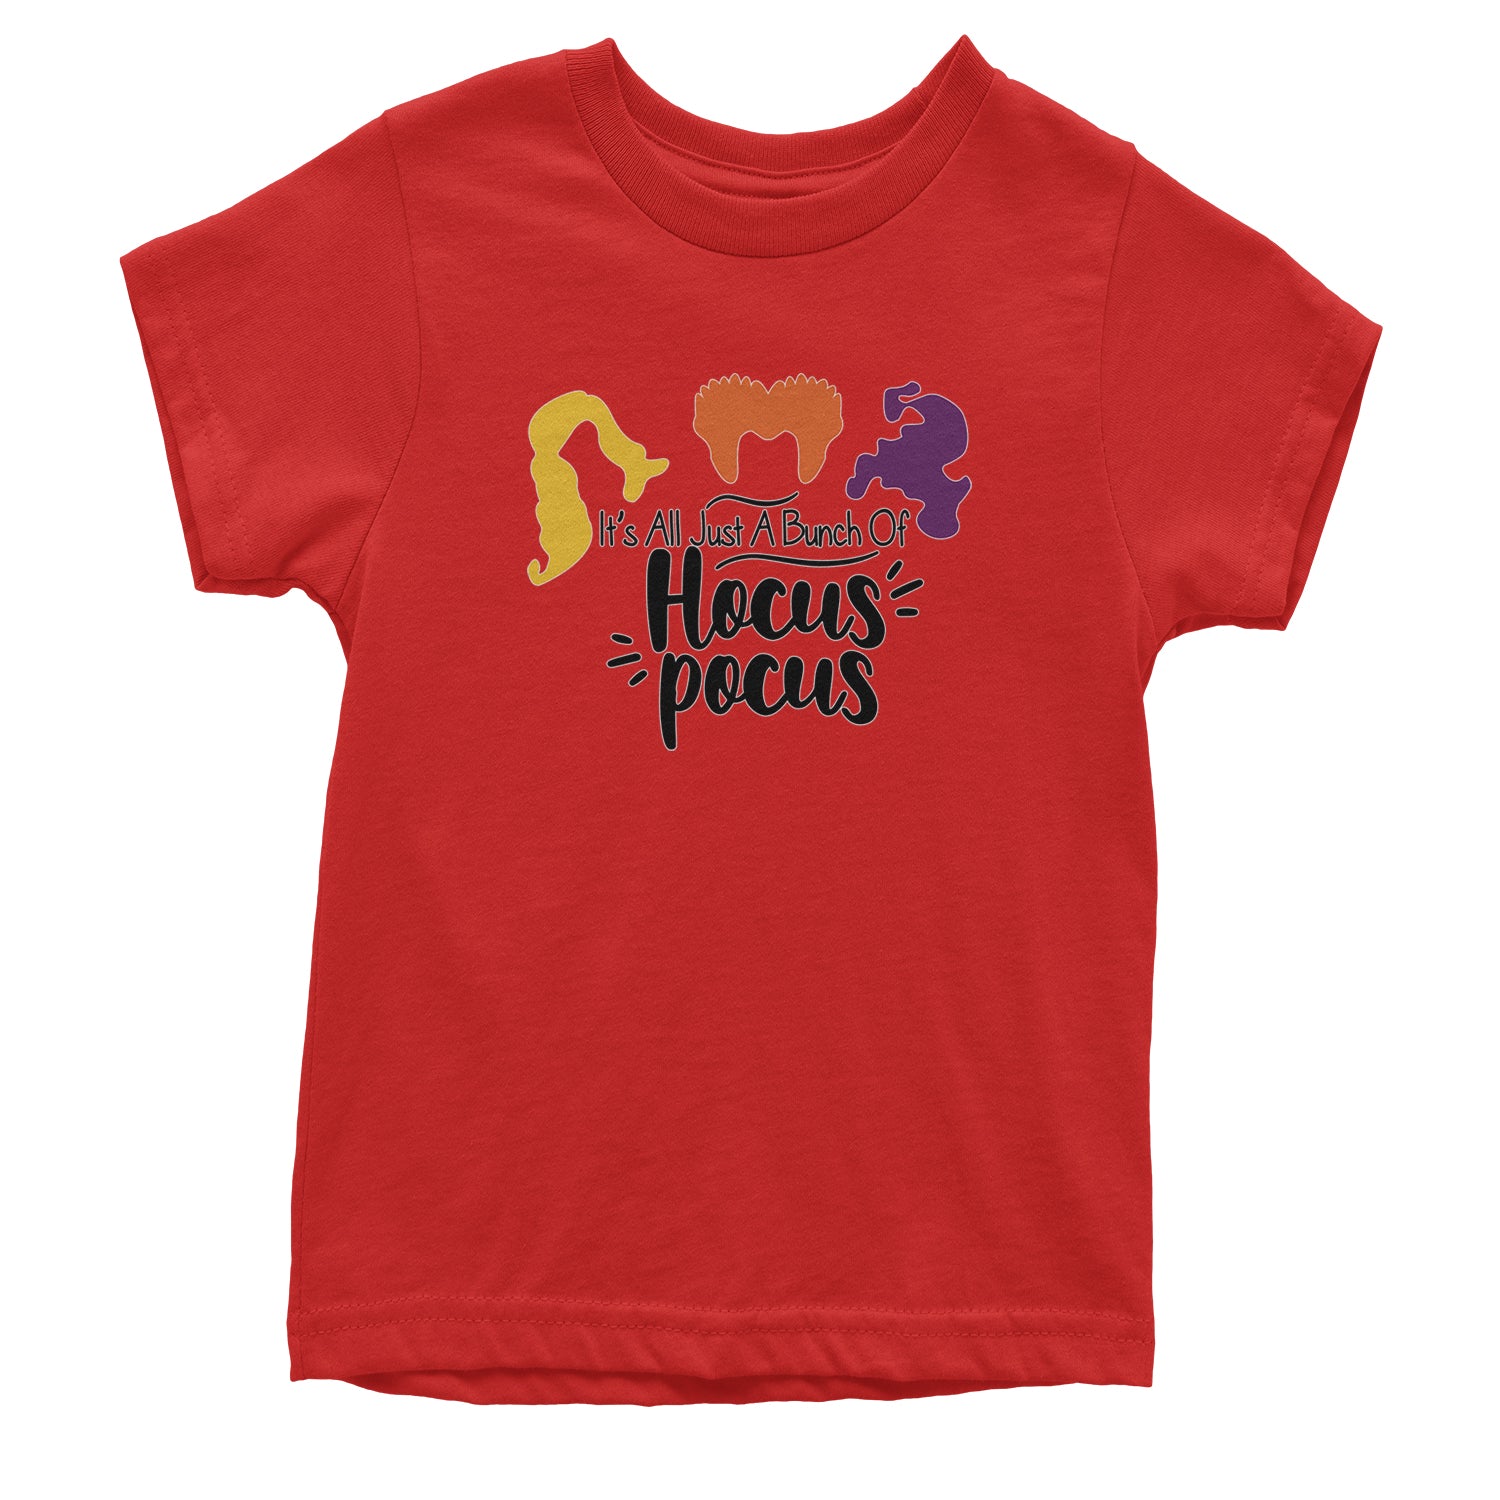 It's Just A Bunch Of Hocus Pocus Youth T-shirt descendants, enchanted, eve, hallows, hocus, or, pocus, sanderson, sisters, treat, trick, witches by Expression Tees